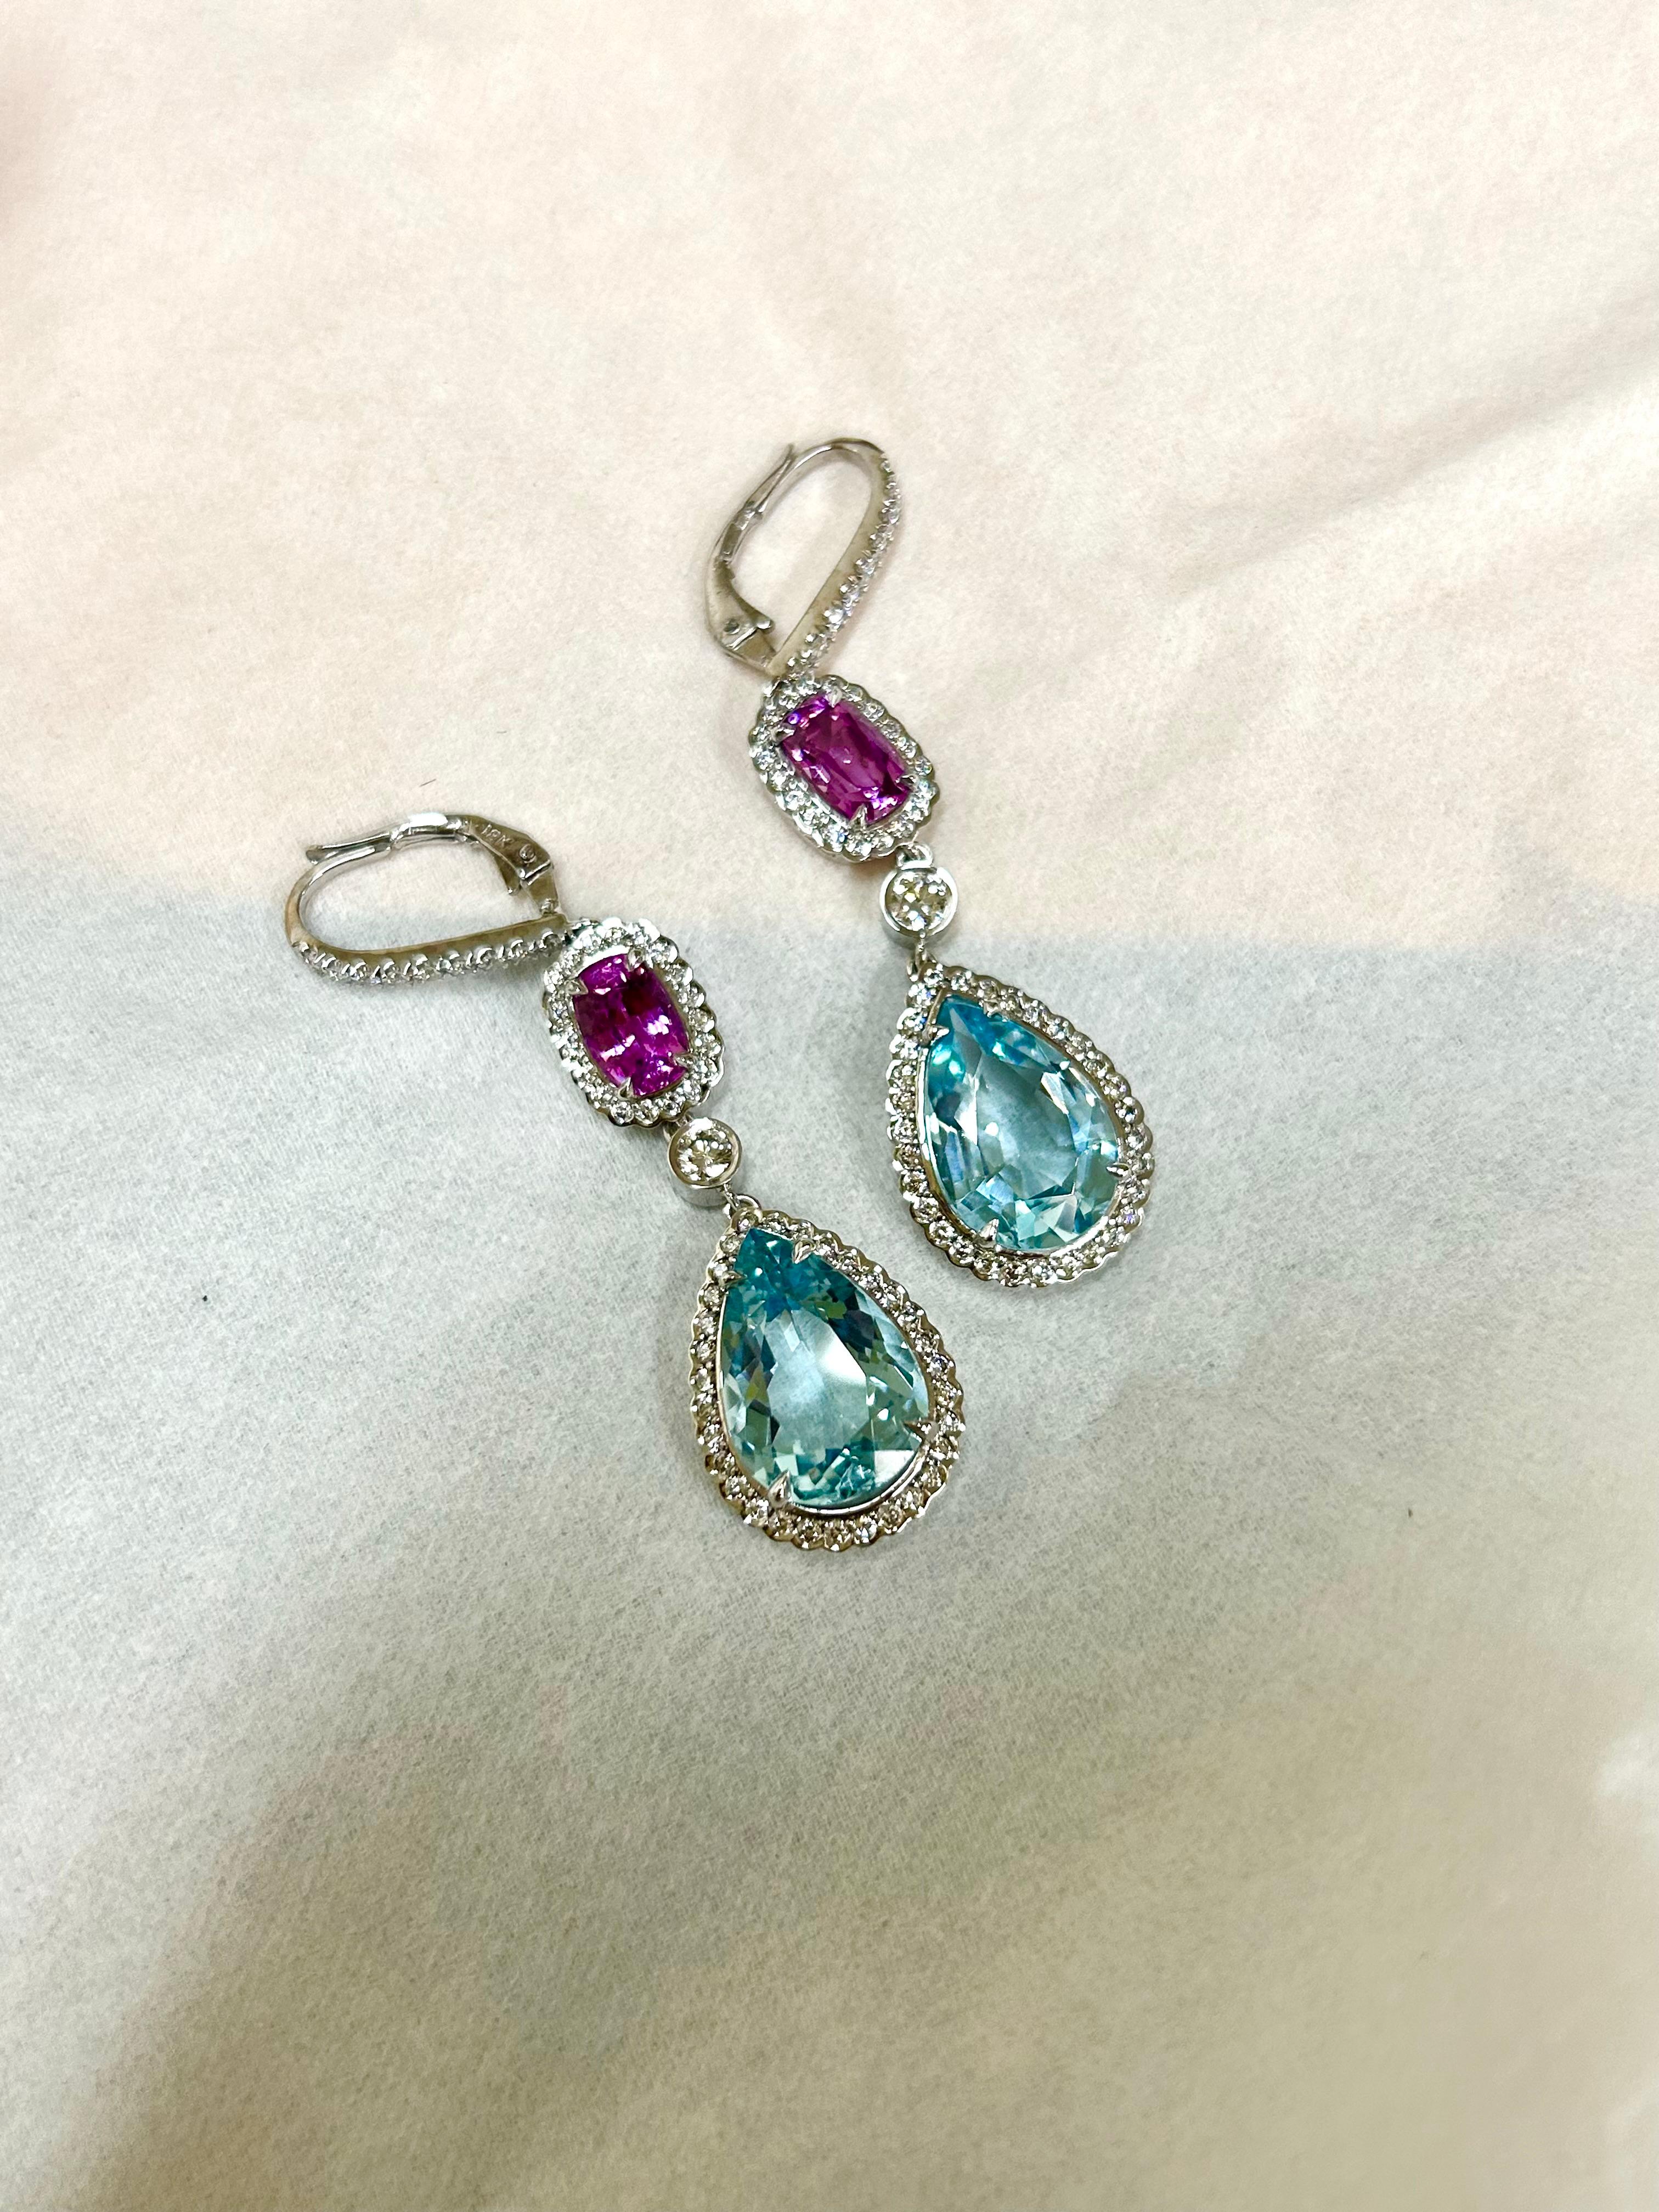 18K white gold earrings, featuring two glistening Aquamarines weighing 9.71 carats, paired with two dazzling Pink Sapphires weighing 2.83 carats, encrusted with a total of 1.32 carats of sparkling white diamonds.